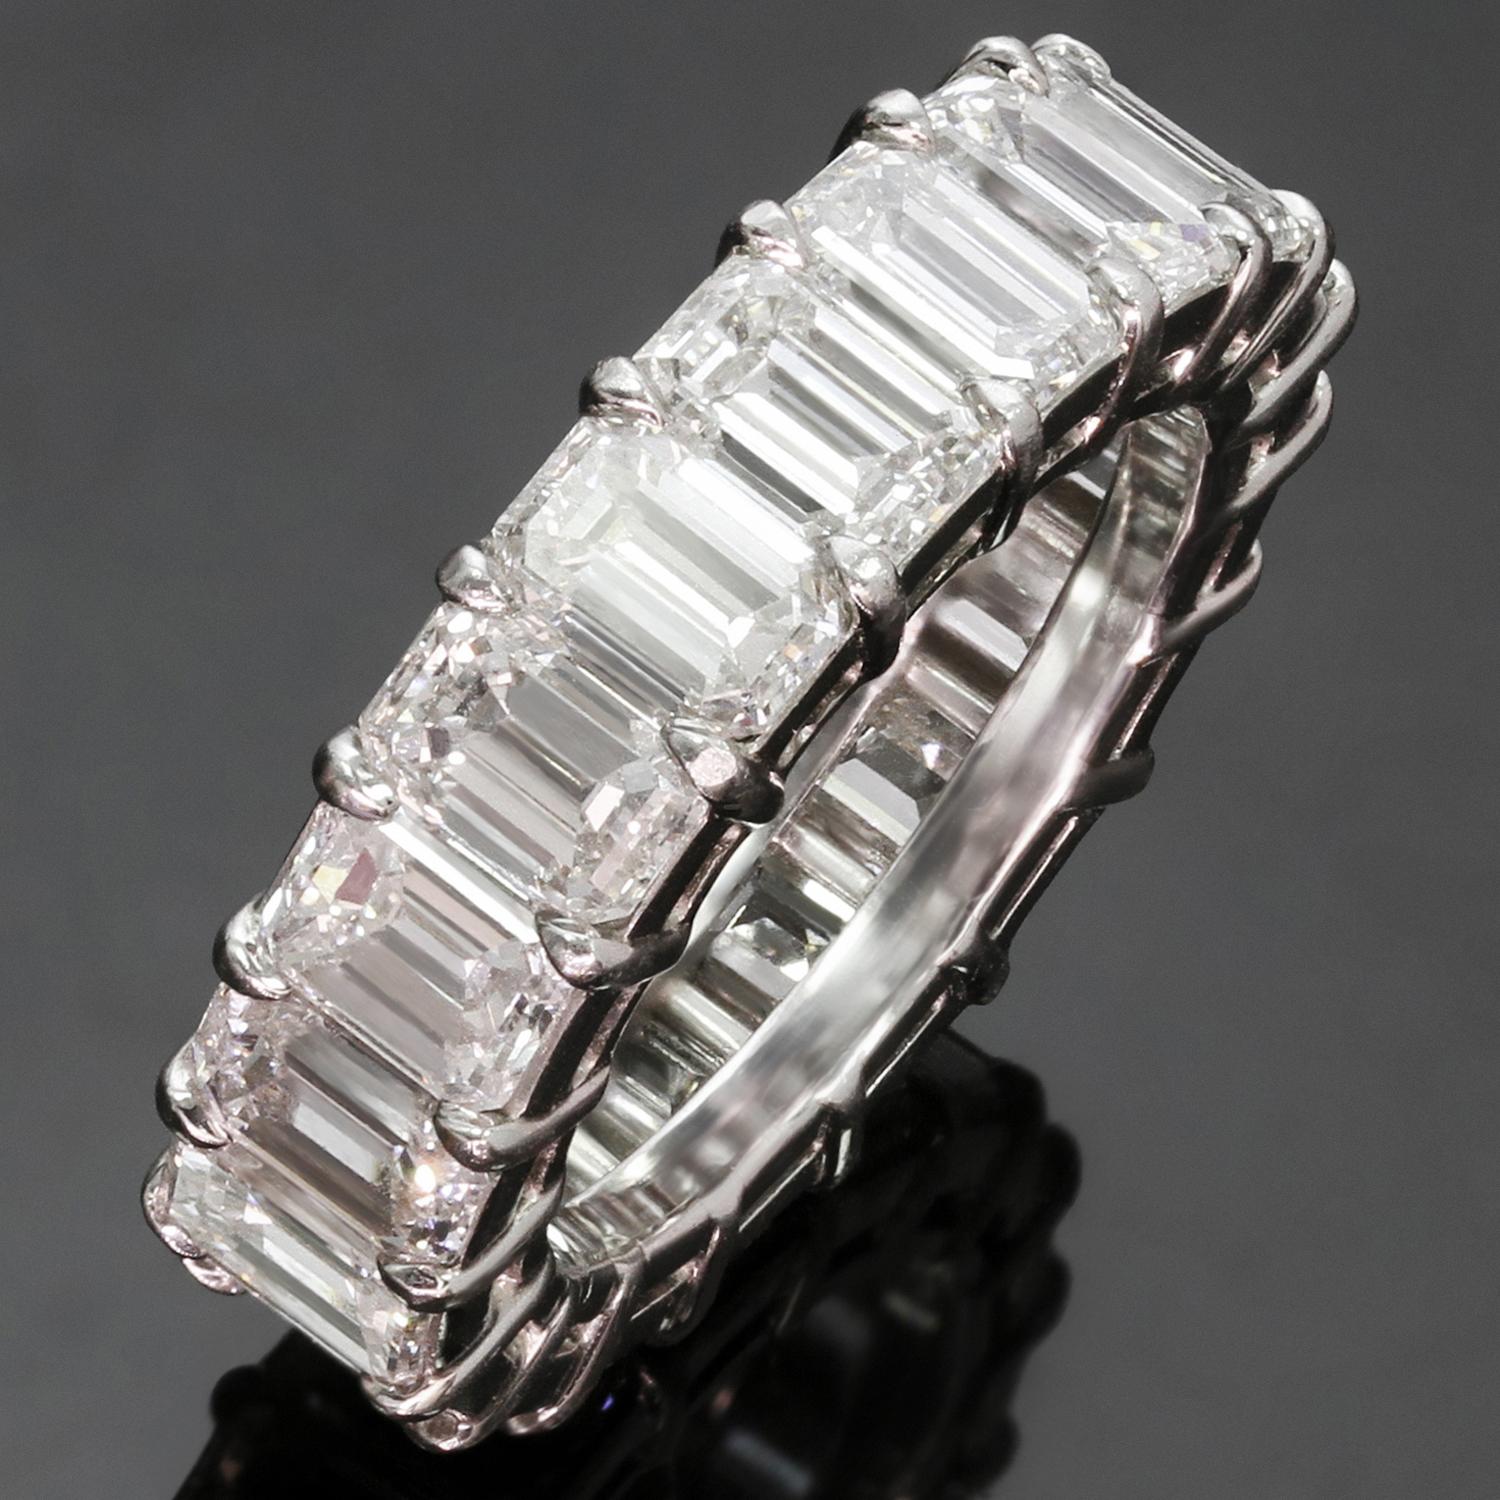 This brilliantly hand-crafted luminous platinum wedding band features 19 emerald-cut, VS-quality diamonds totaling 9.52 carats.  Measurements: 0.23